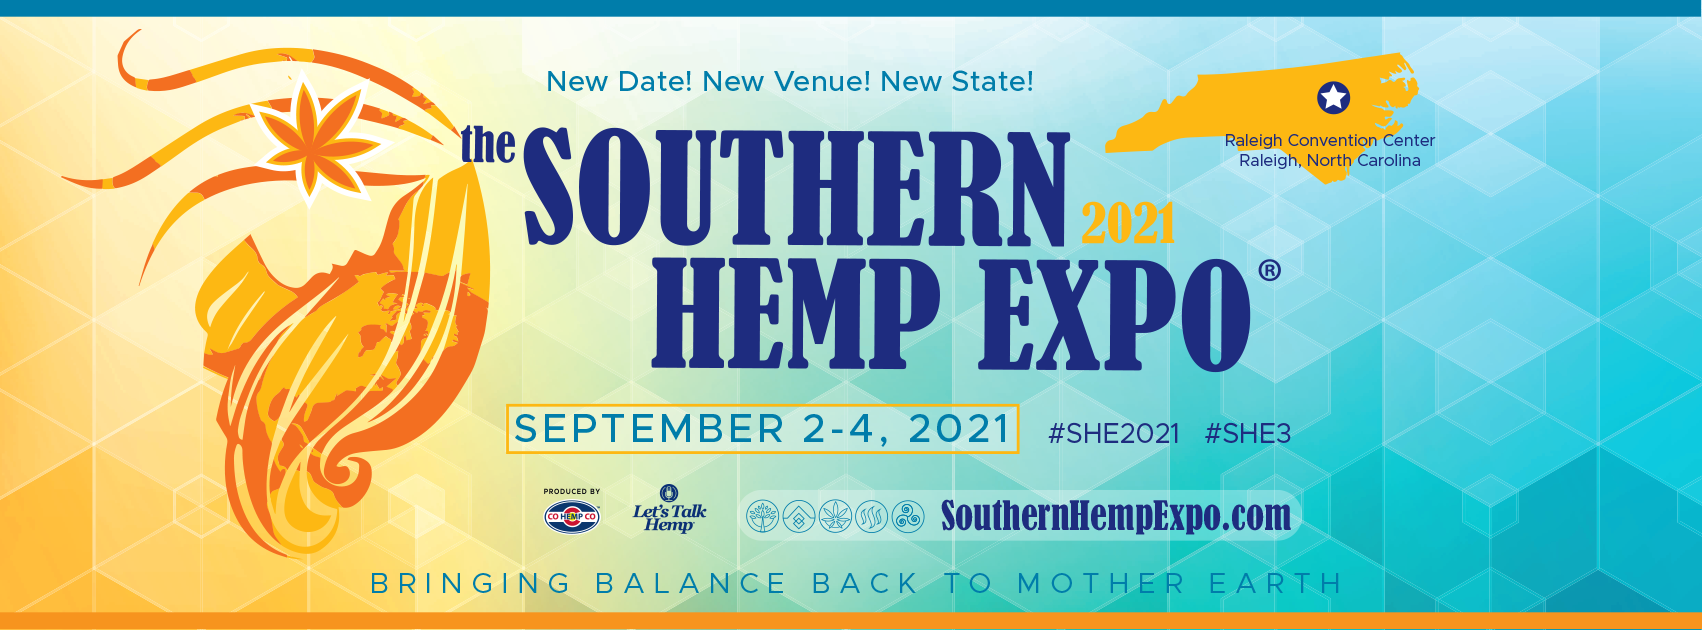 Southern Hemp Expo 2021, Septemer 2-4 at Raleigh Convention Center in Raleigh, North Carolina. More info at SouthernHempExpo.com